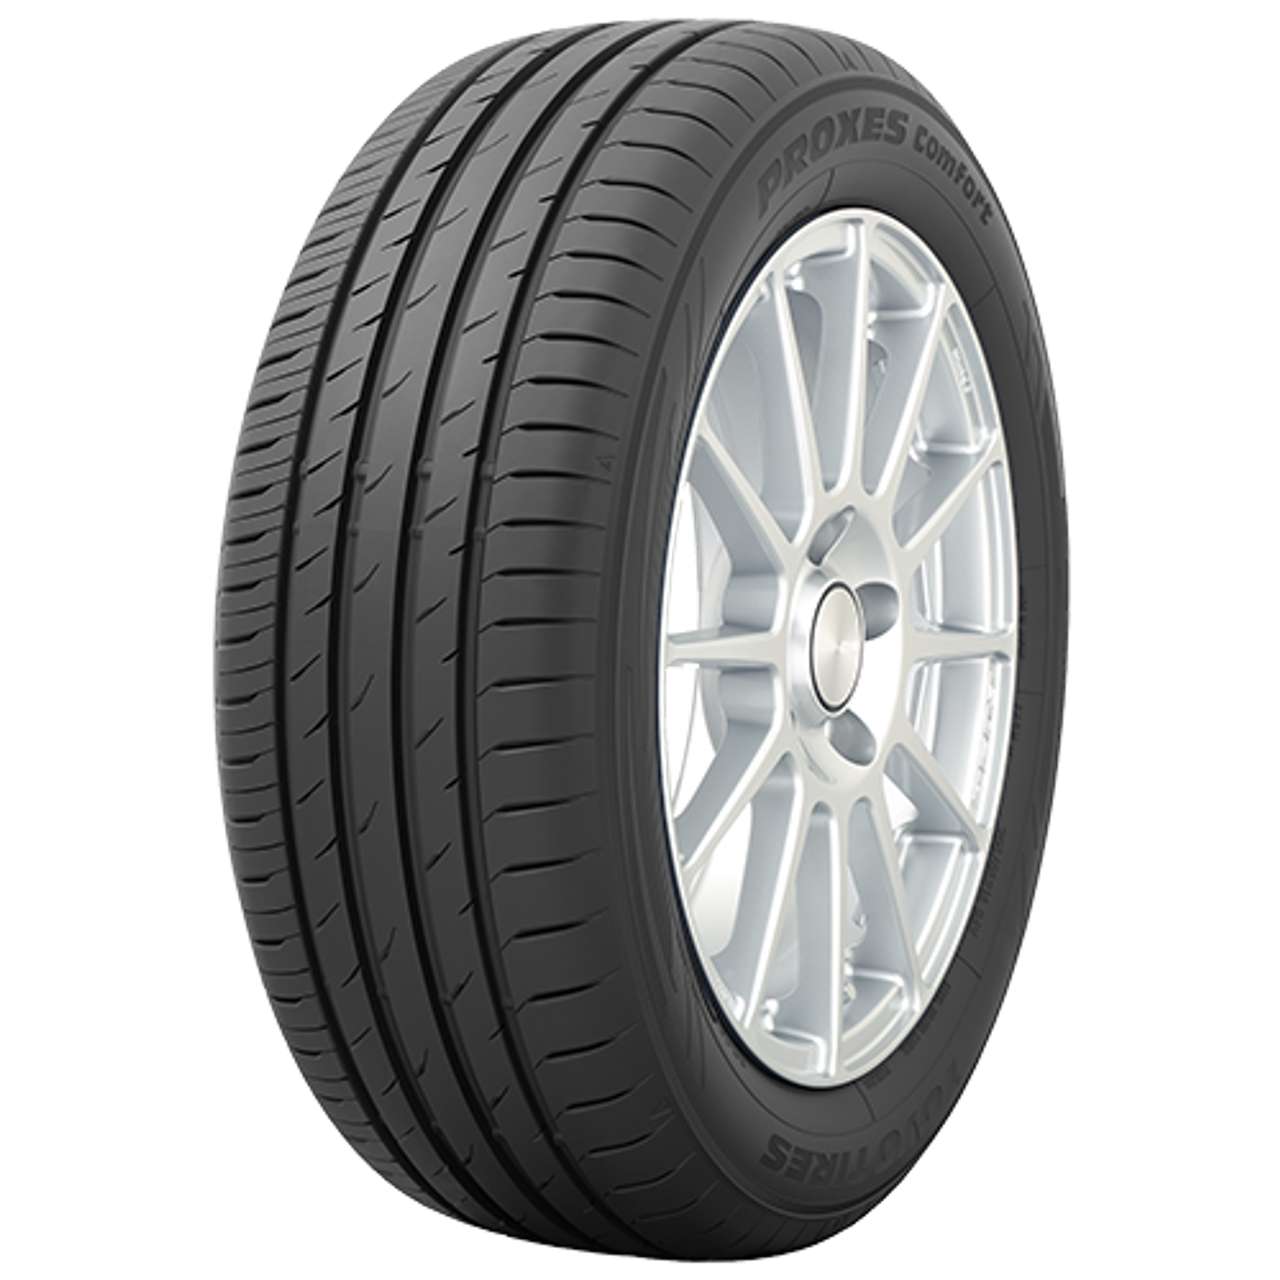 TOYO PROXES COMFORT 205/45R17 88V BSW